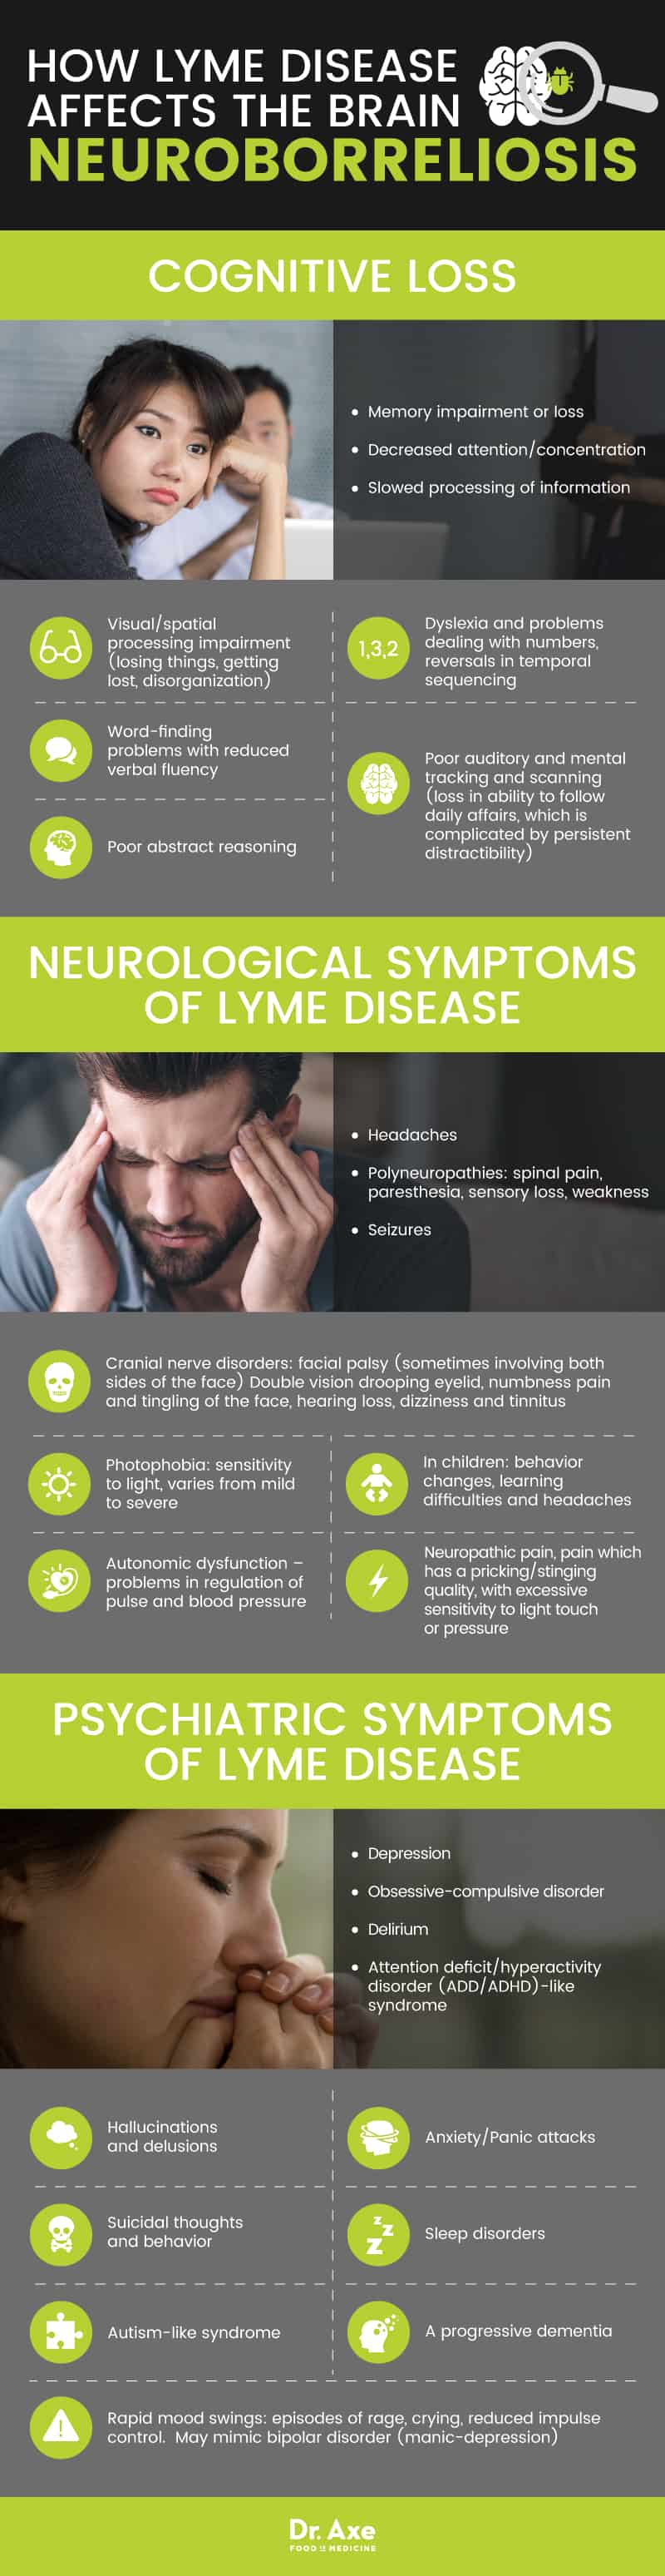 How Lyme disease affects the brain - Dr. Axe